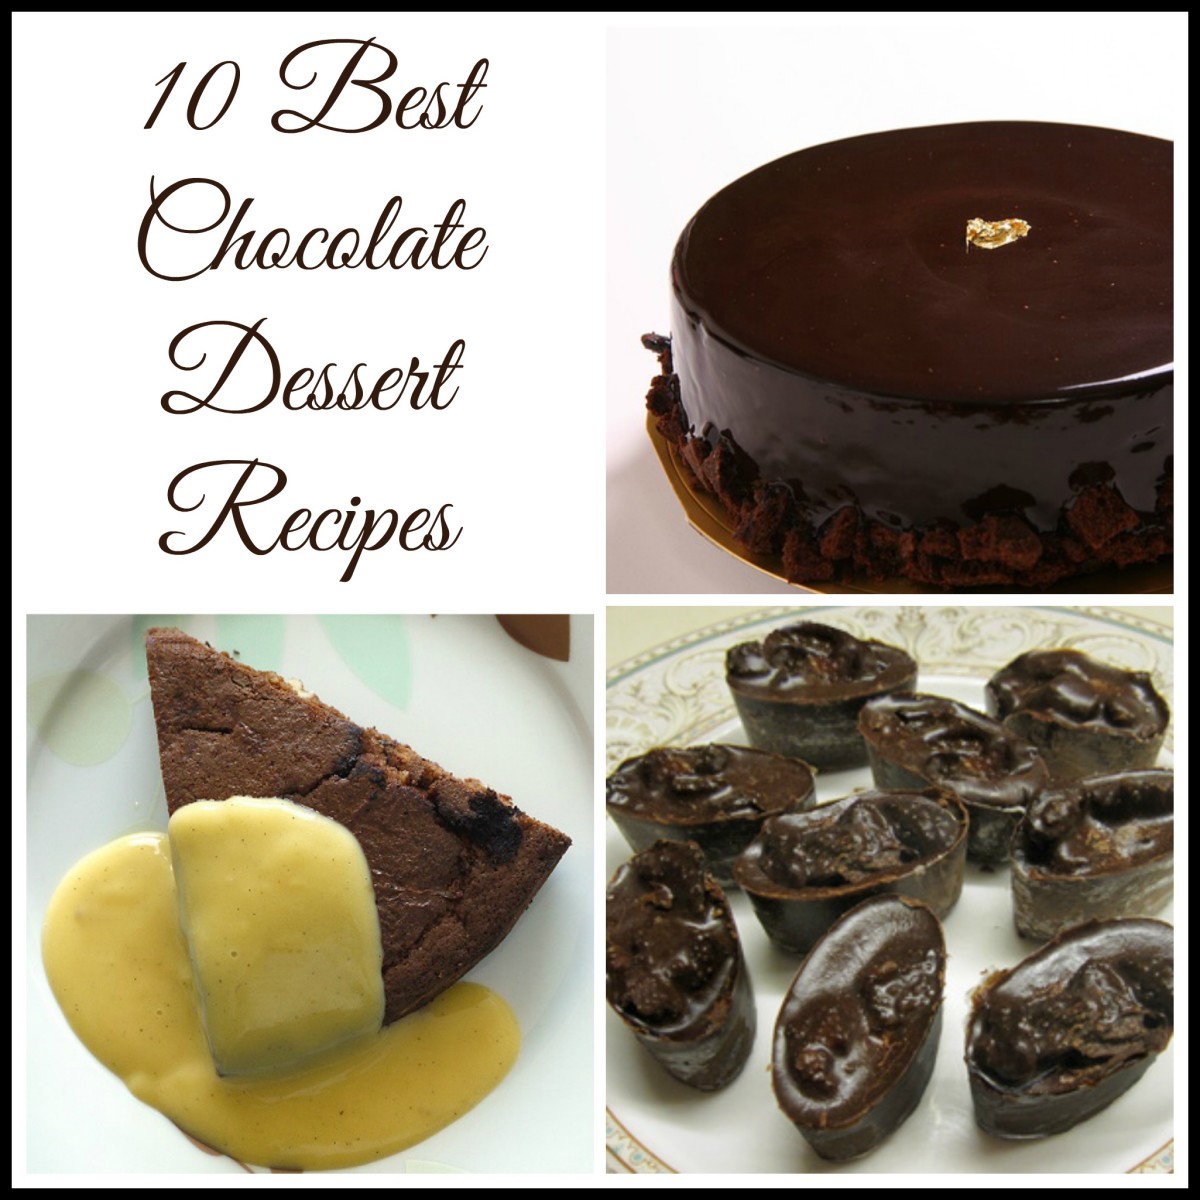 10 Chocolate Dessert Recipes to Delight Your Sweet Tooth